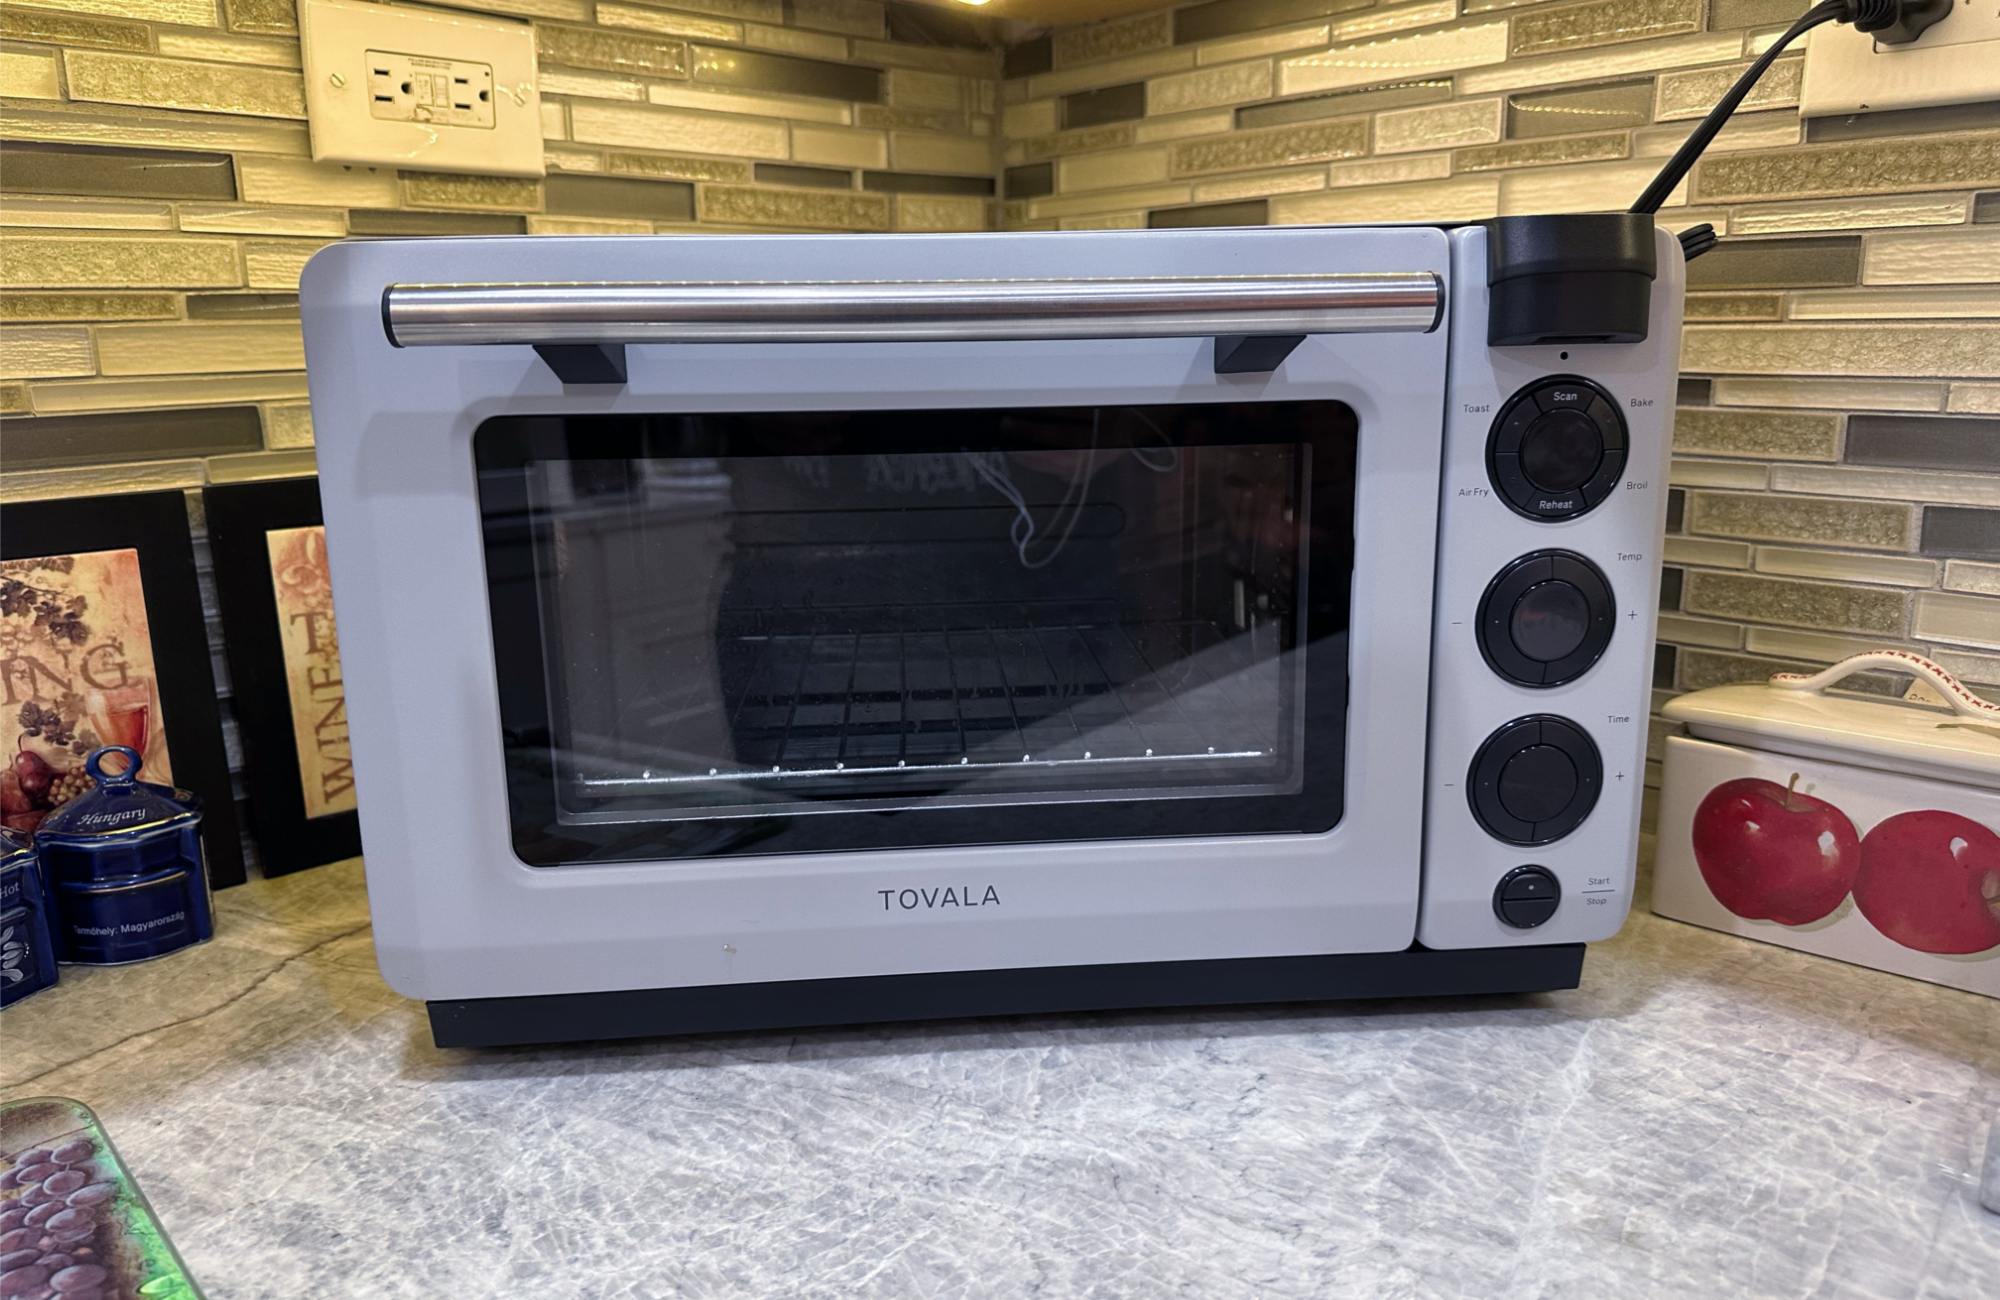 5 Hacks For Getting The Most Out Of Your Tovala Smart Oven & Smart